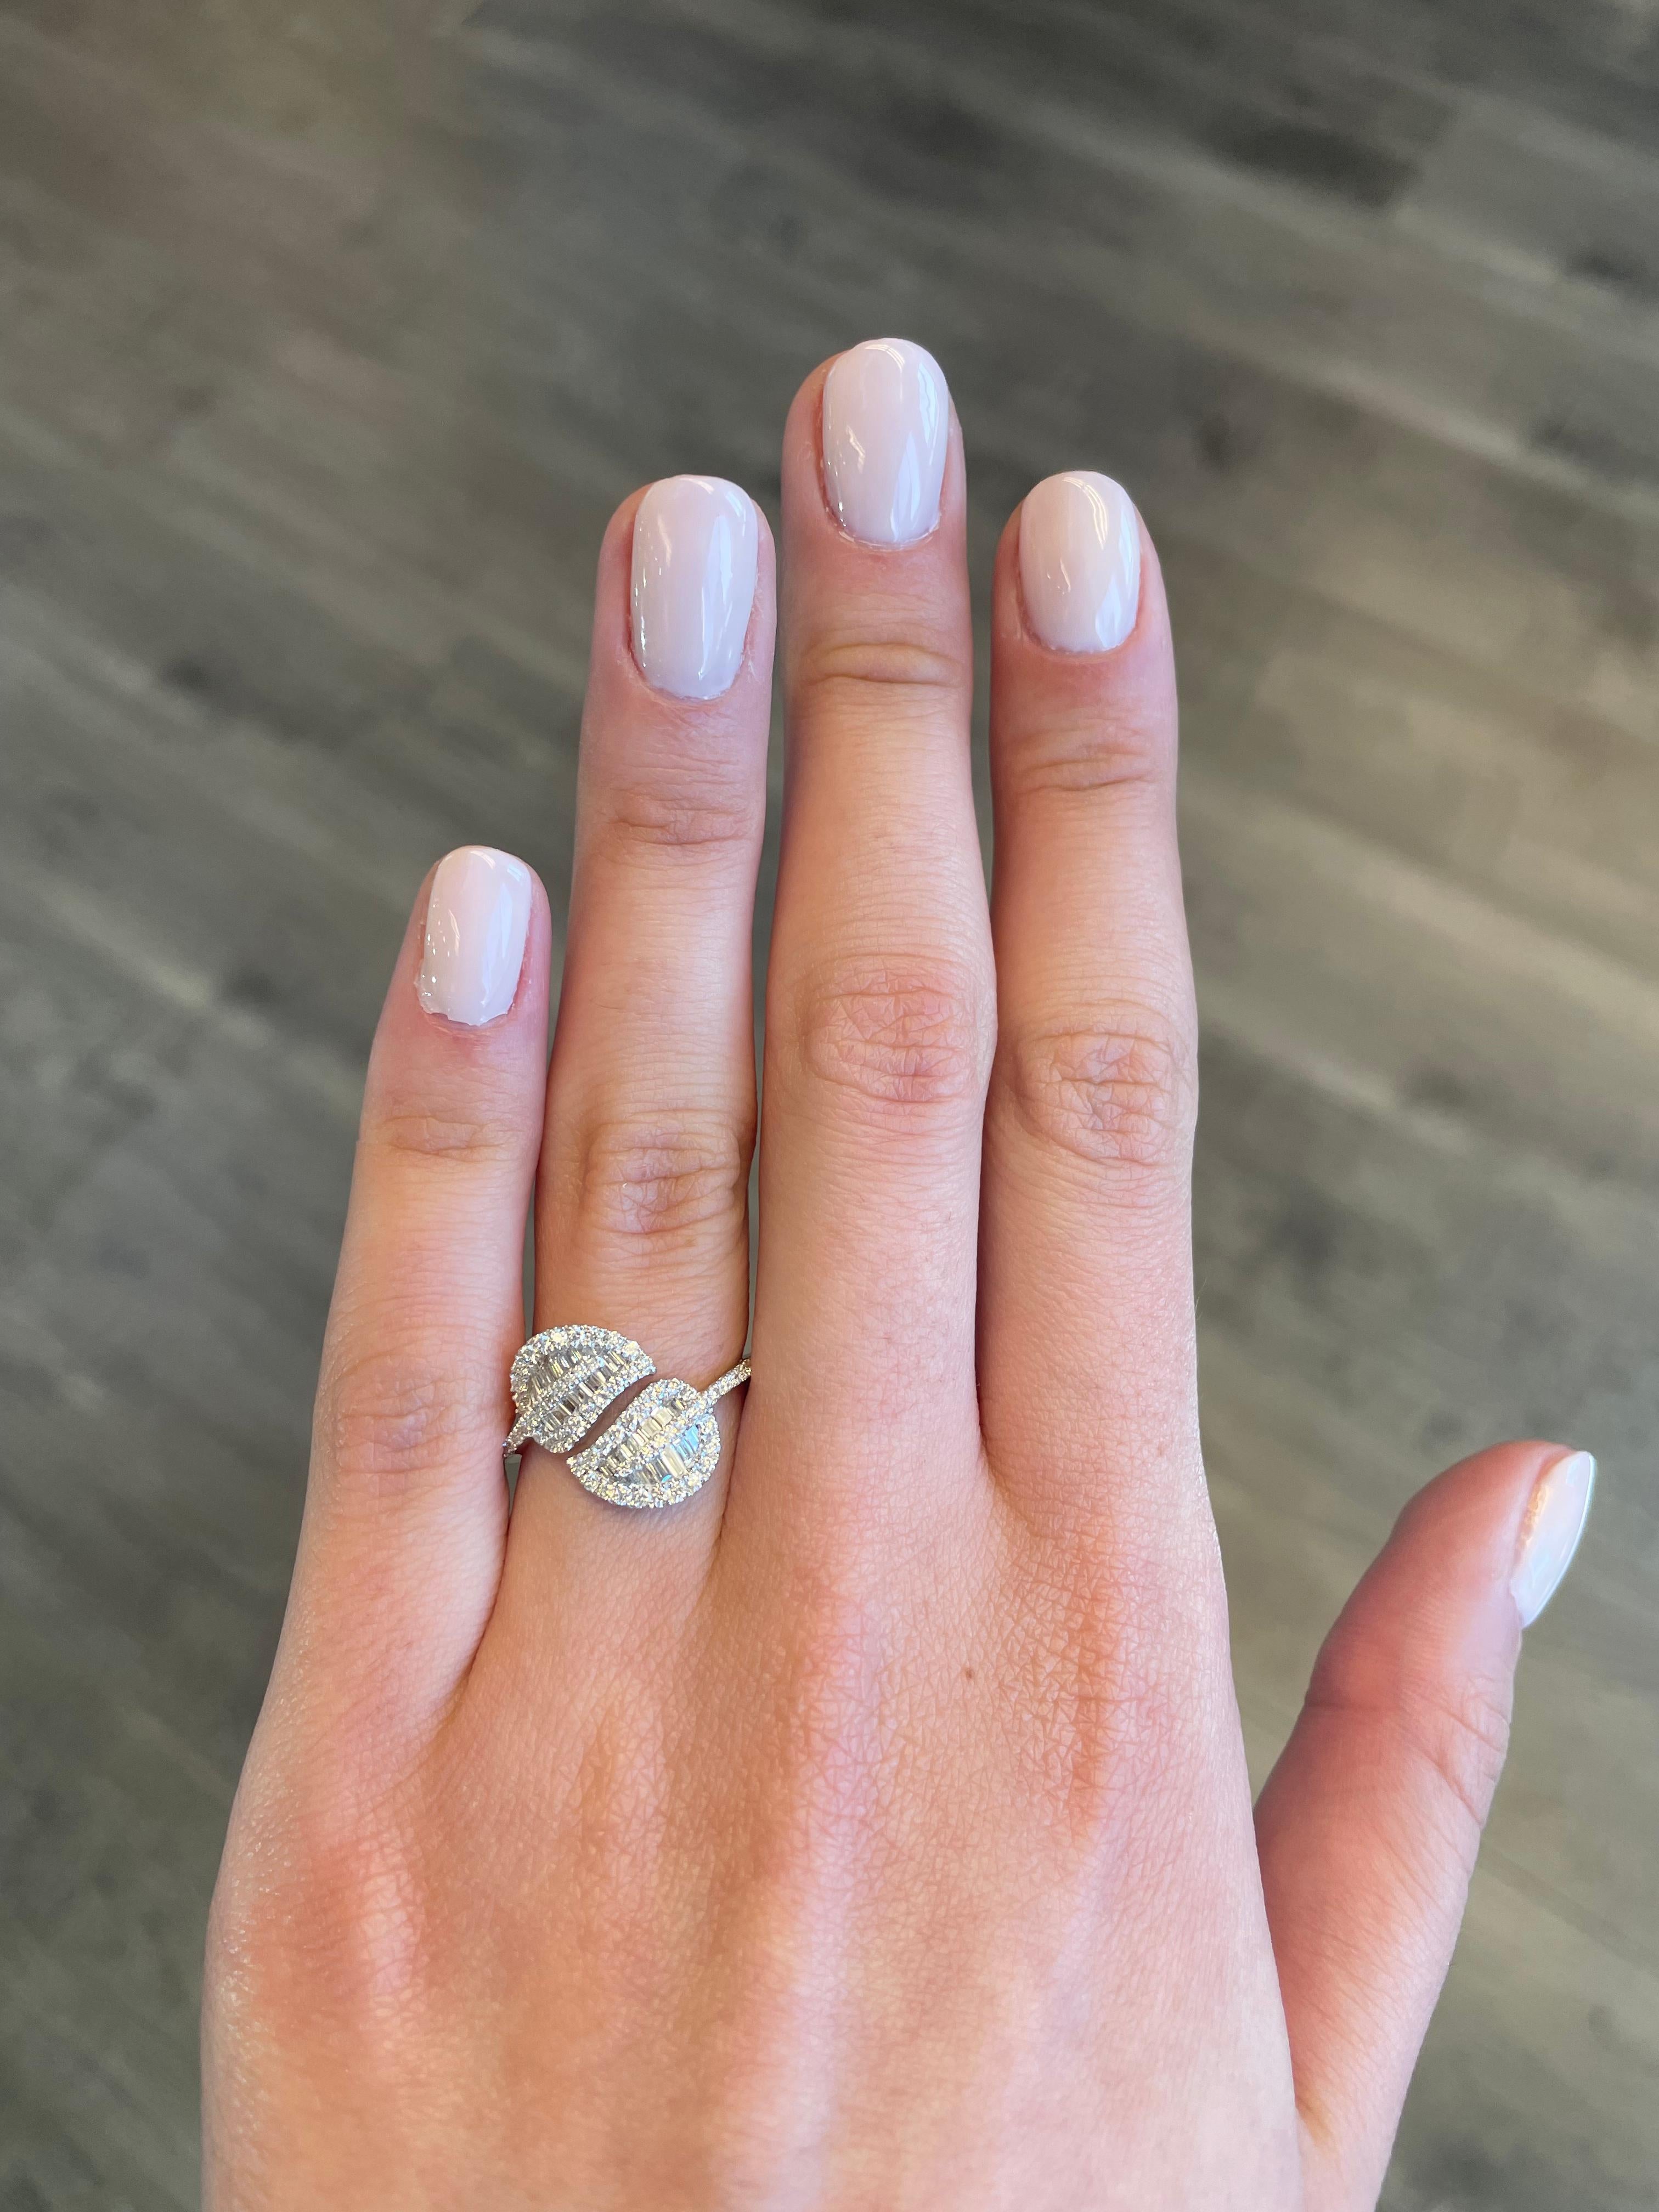 Stunning modern leaf motif bypass ring, by Alexander Beverly Hills.
100 round and baguette cut diamonds, 0.81 carats. Approximately G/H color grade and VS clarity grade. 18-karat white gold, 3.11 grams, current ring size 6.75.
Accommodated with an